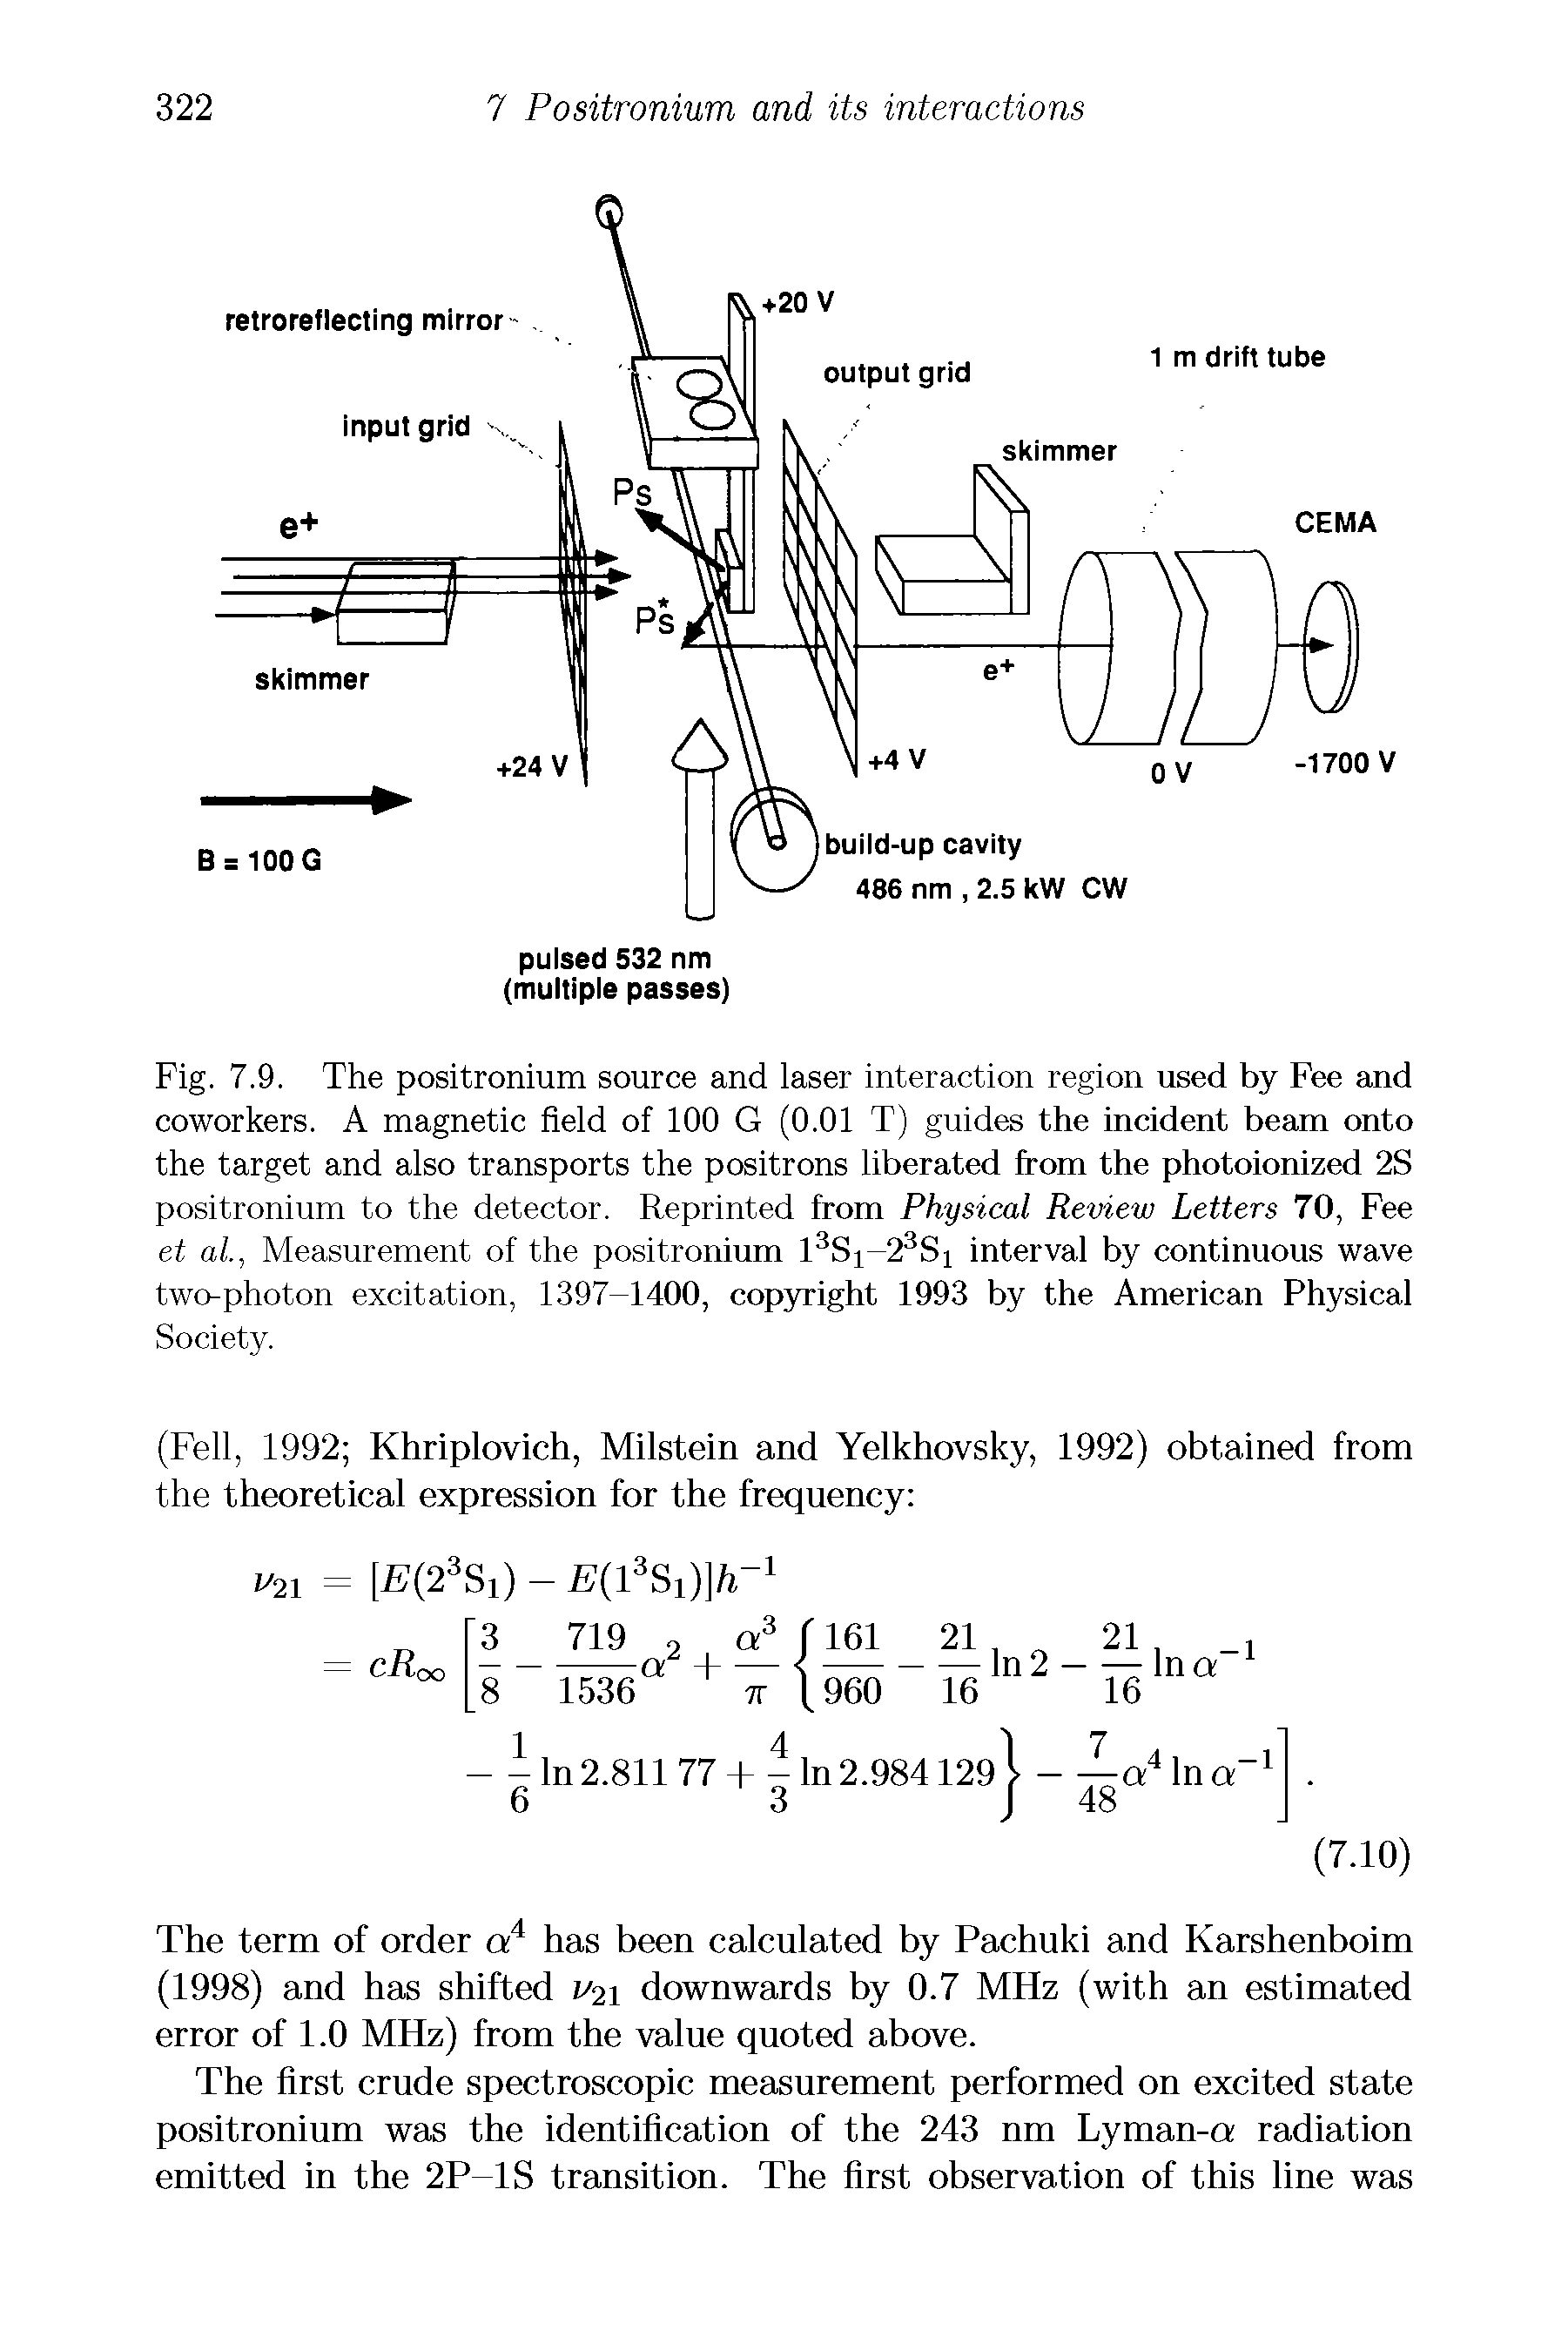 Fig. 7.9. The positronium source and laser interaction region used by Fee and coworkers. A magnetic field of 100 G (0.01 T) guides the incident beam onto the target and also transports the positrons liberated from the photoionized 2S positronium to the detector. Reprinted from Physical Review Letters 70, Fee et al, Measurement of the positronium 13Si-23Si interval by continuous wave two-photon excitation, 1397-1400, copyright 1993 by the American Physical Society.